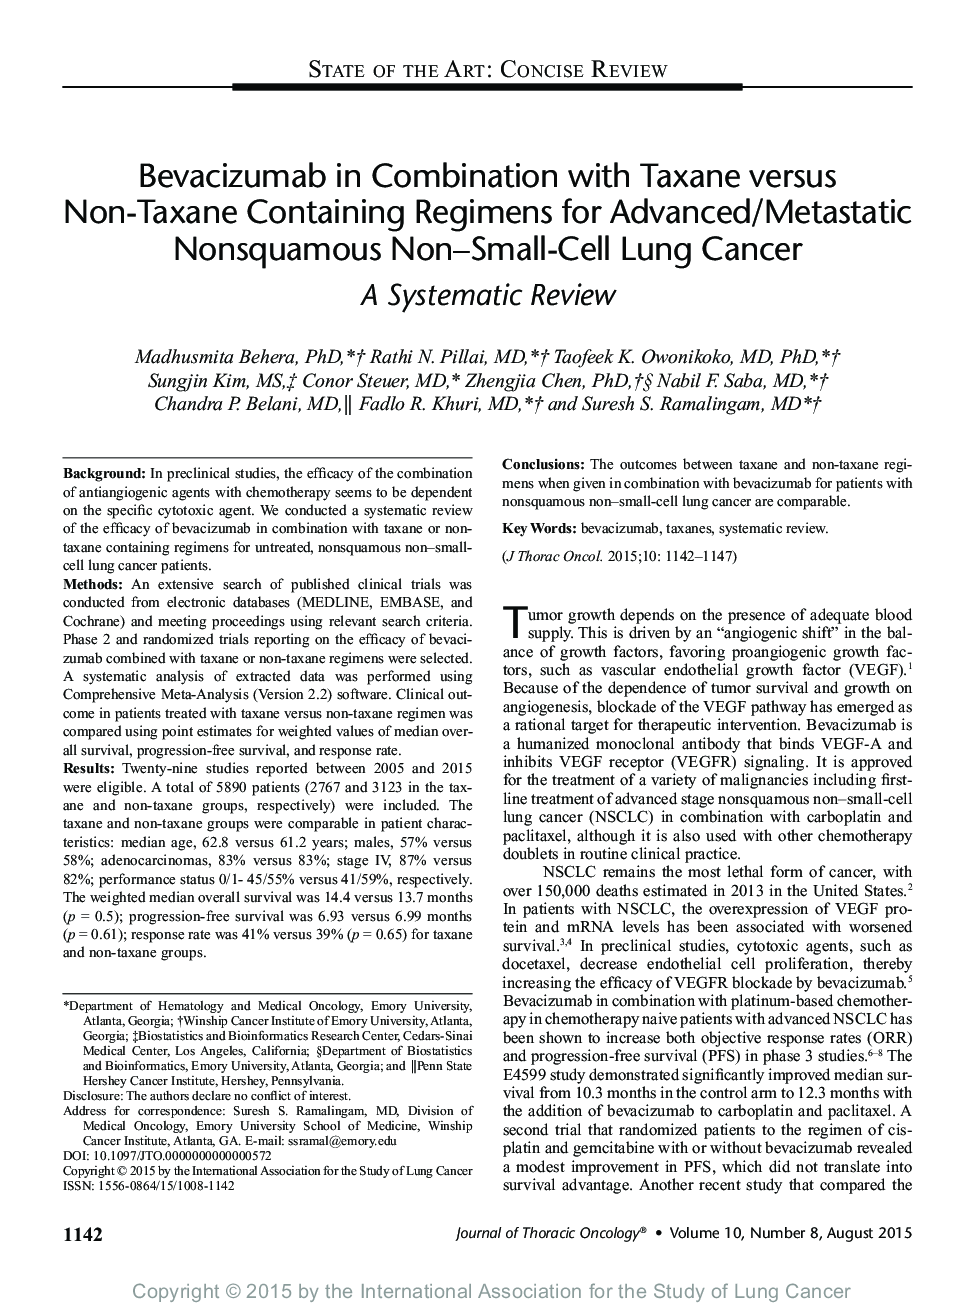 Bevacizumab in Combination with Taxane versus Non-Taxane Containing Regimens for Advanced/Metastatic Nonsquamous Non-Small-Cell Lung Cancer: A Systematic Review